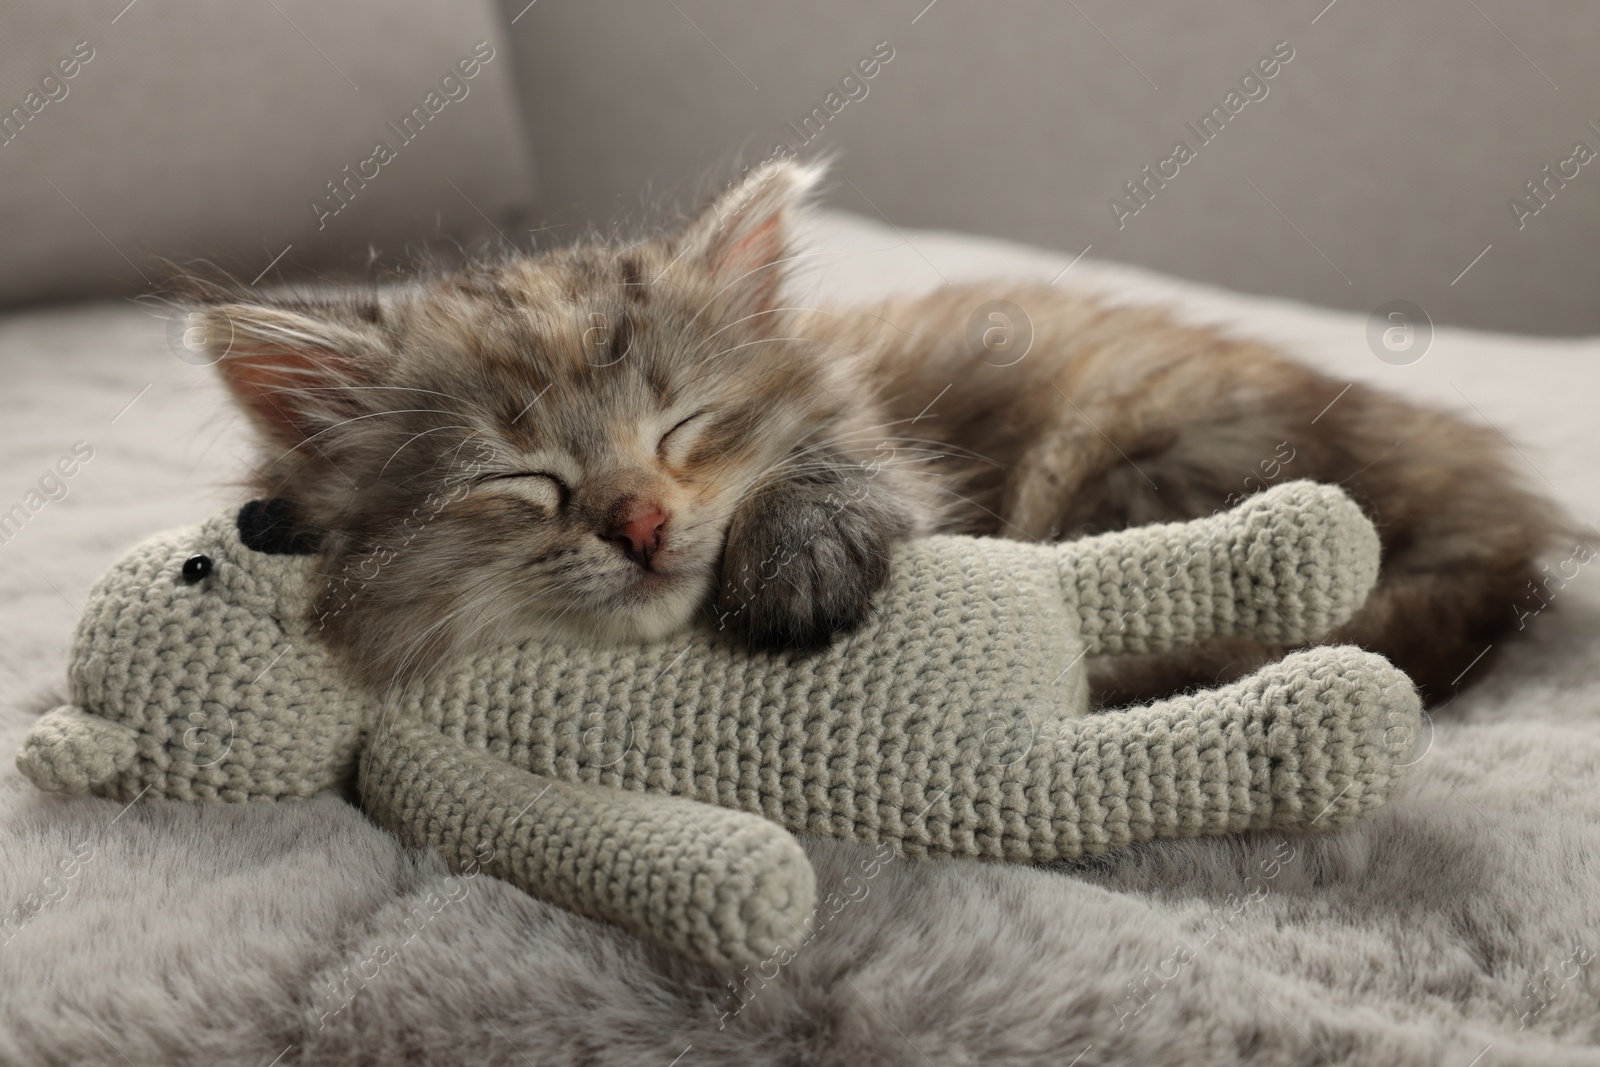 Photo of Cute kitten sleeping with toy on fuzzy grey blanket